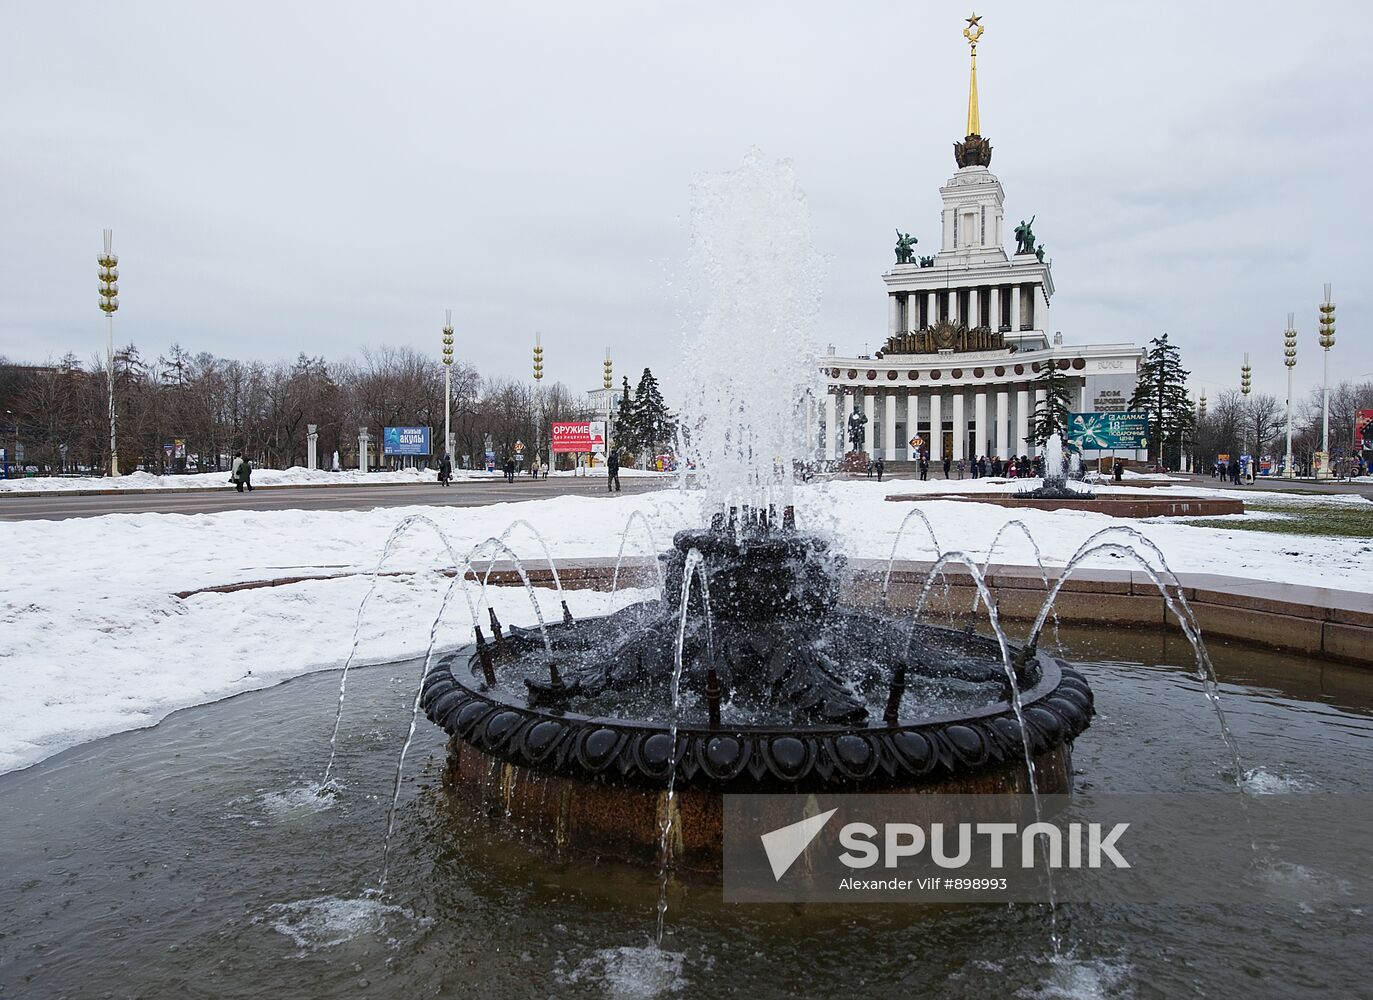 Fountains open at Central Alley of All-Russian Exhibition Center